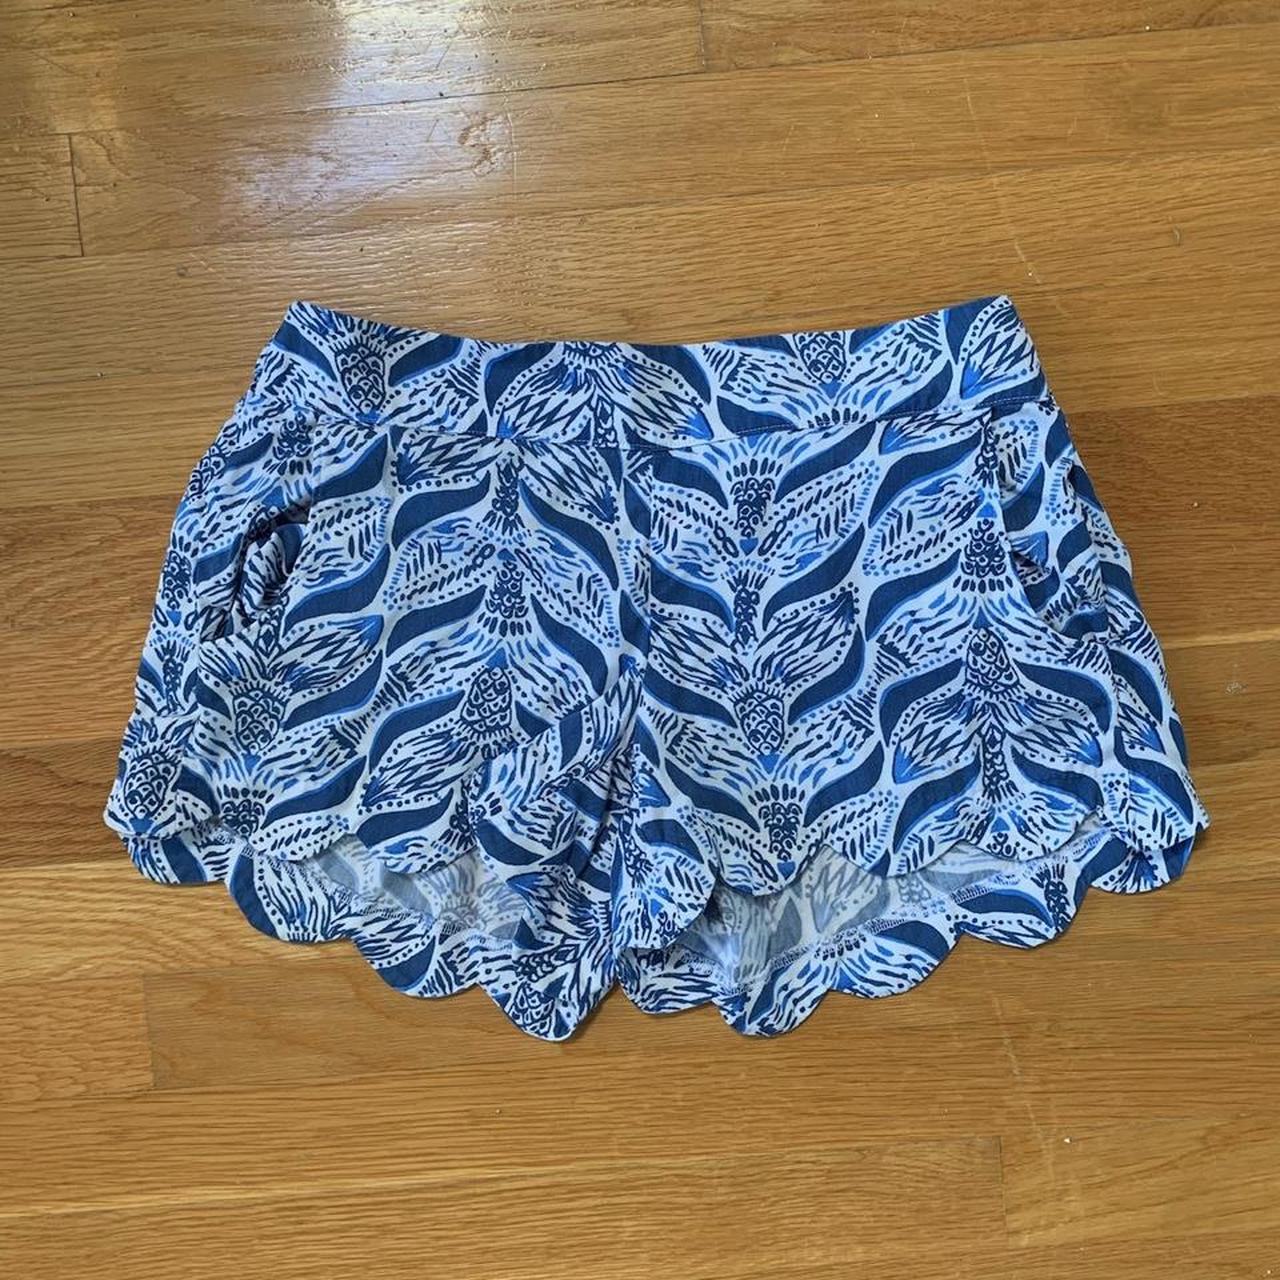 Lilly Pulitzer Dahlia Shorts in Mermaids Tail -blue... - Depop